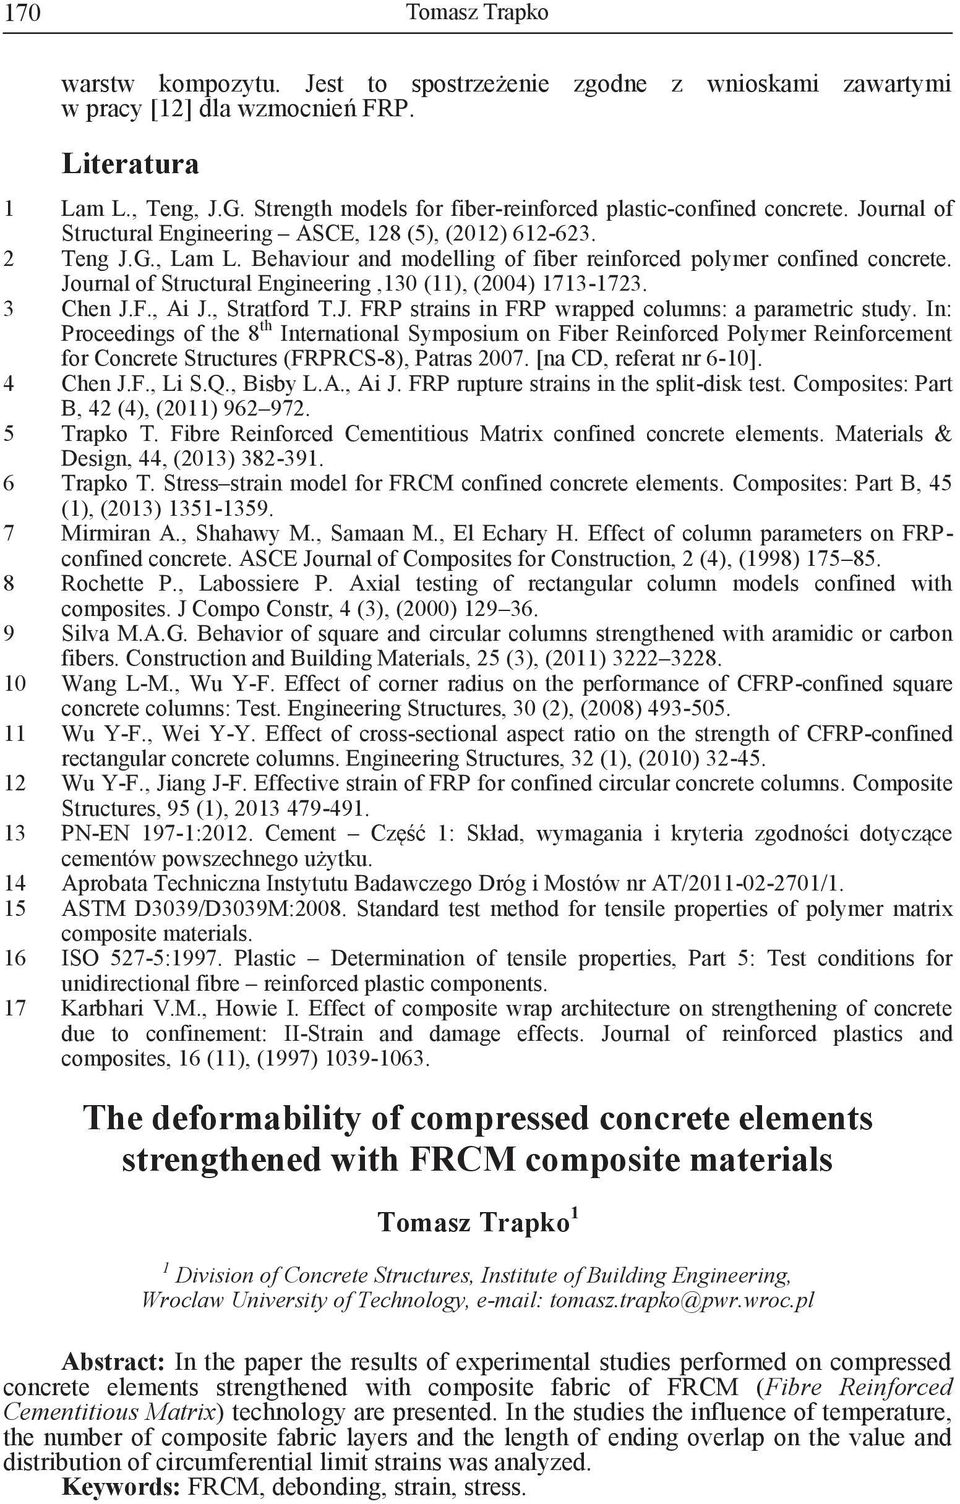 Behaviour and modelling of fiber reinforced polymer confined concrete. Journal of Structural Engineering,130 (11), (2004) 1713-1723. 3 Chen J.F., Ai J., Stratford T.J. FRP strains in FRP wrapped columns: a parametric study.